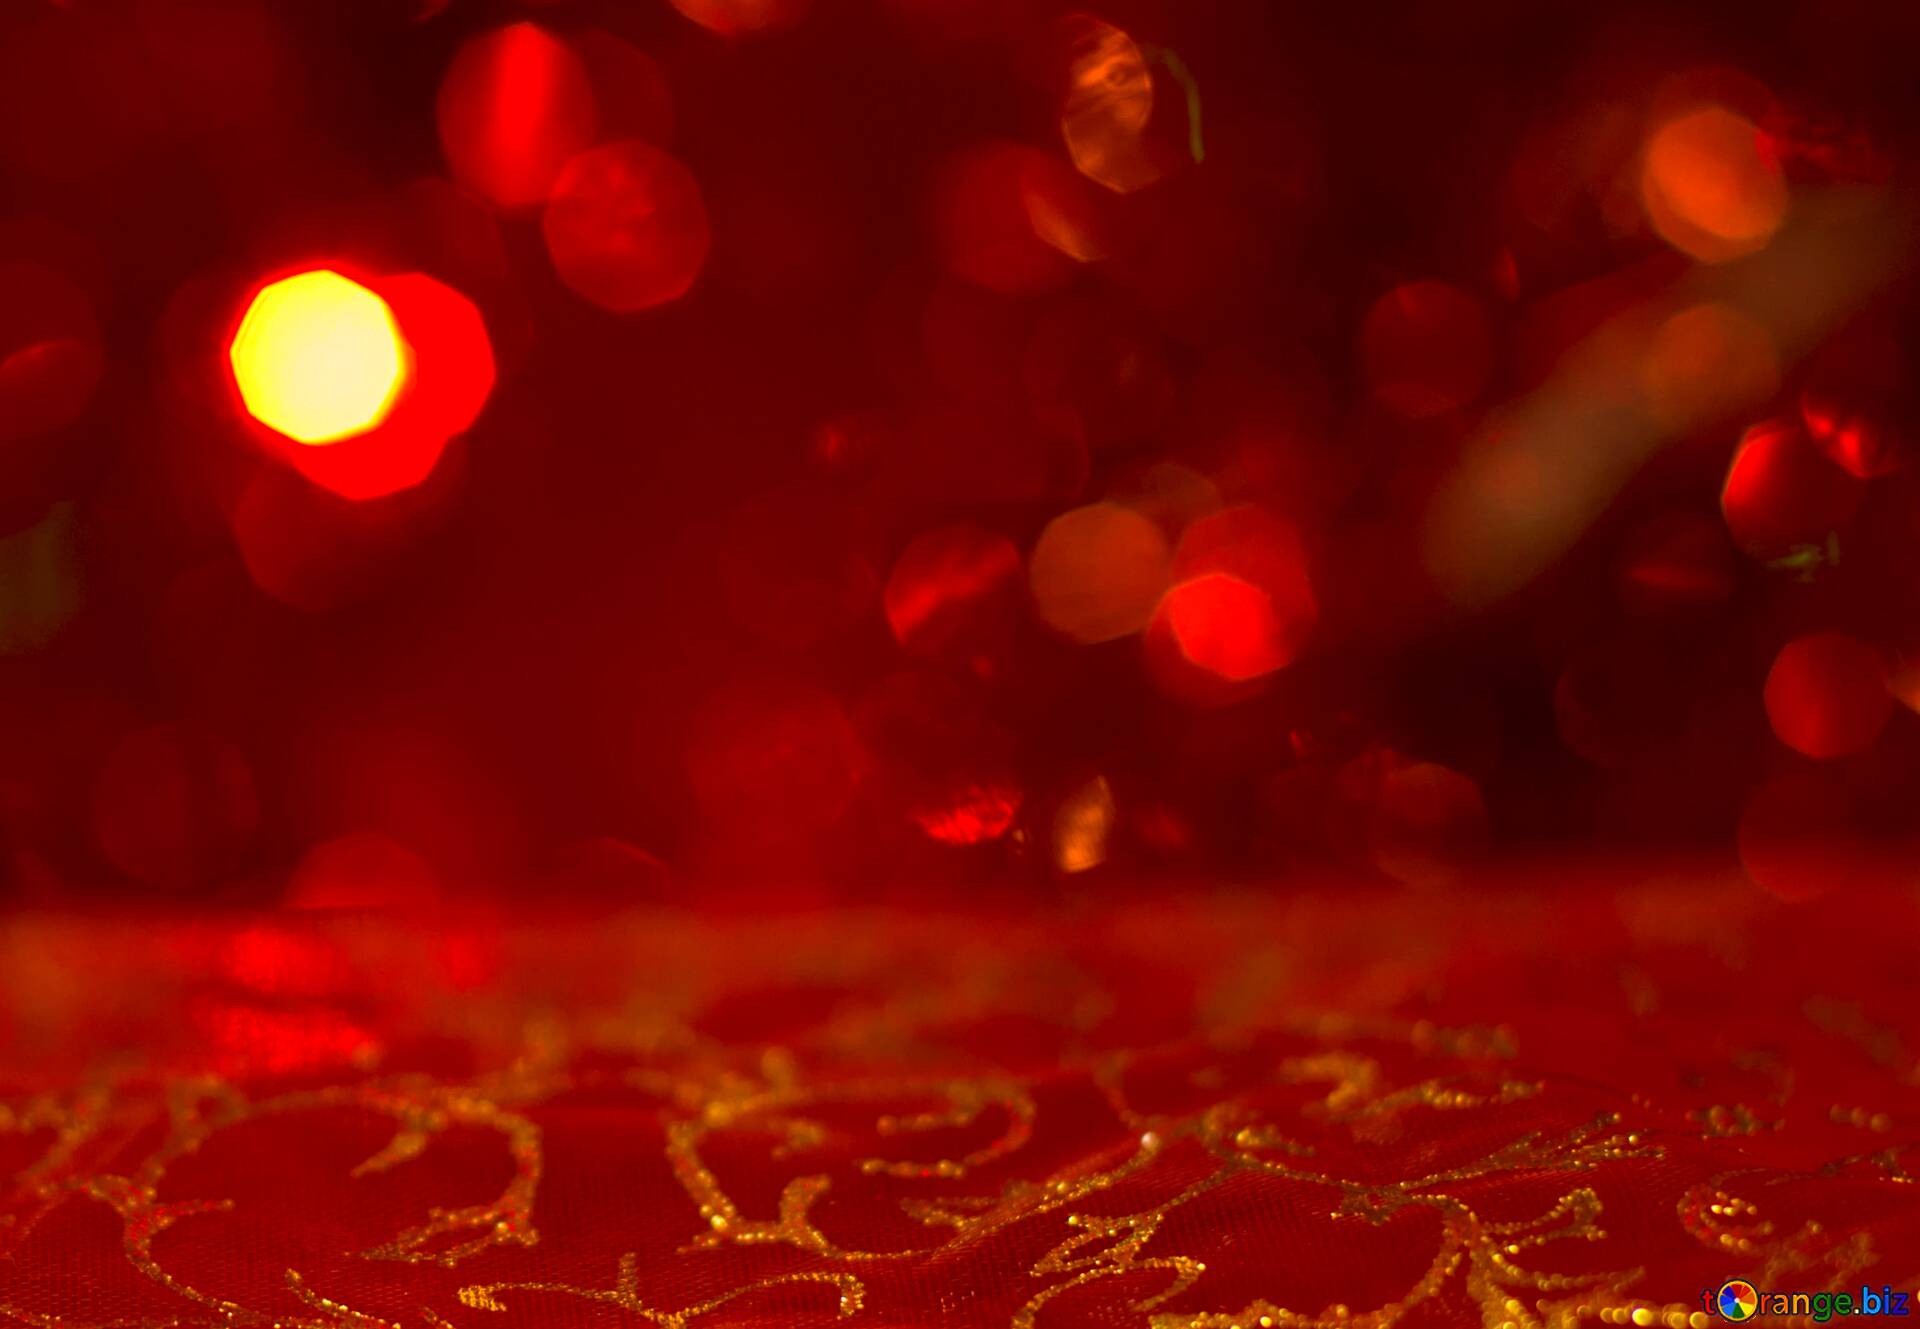 Download free picture Christmas red background on CCBY